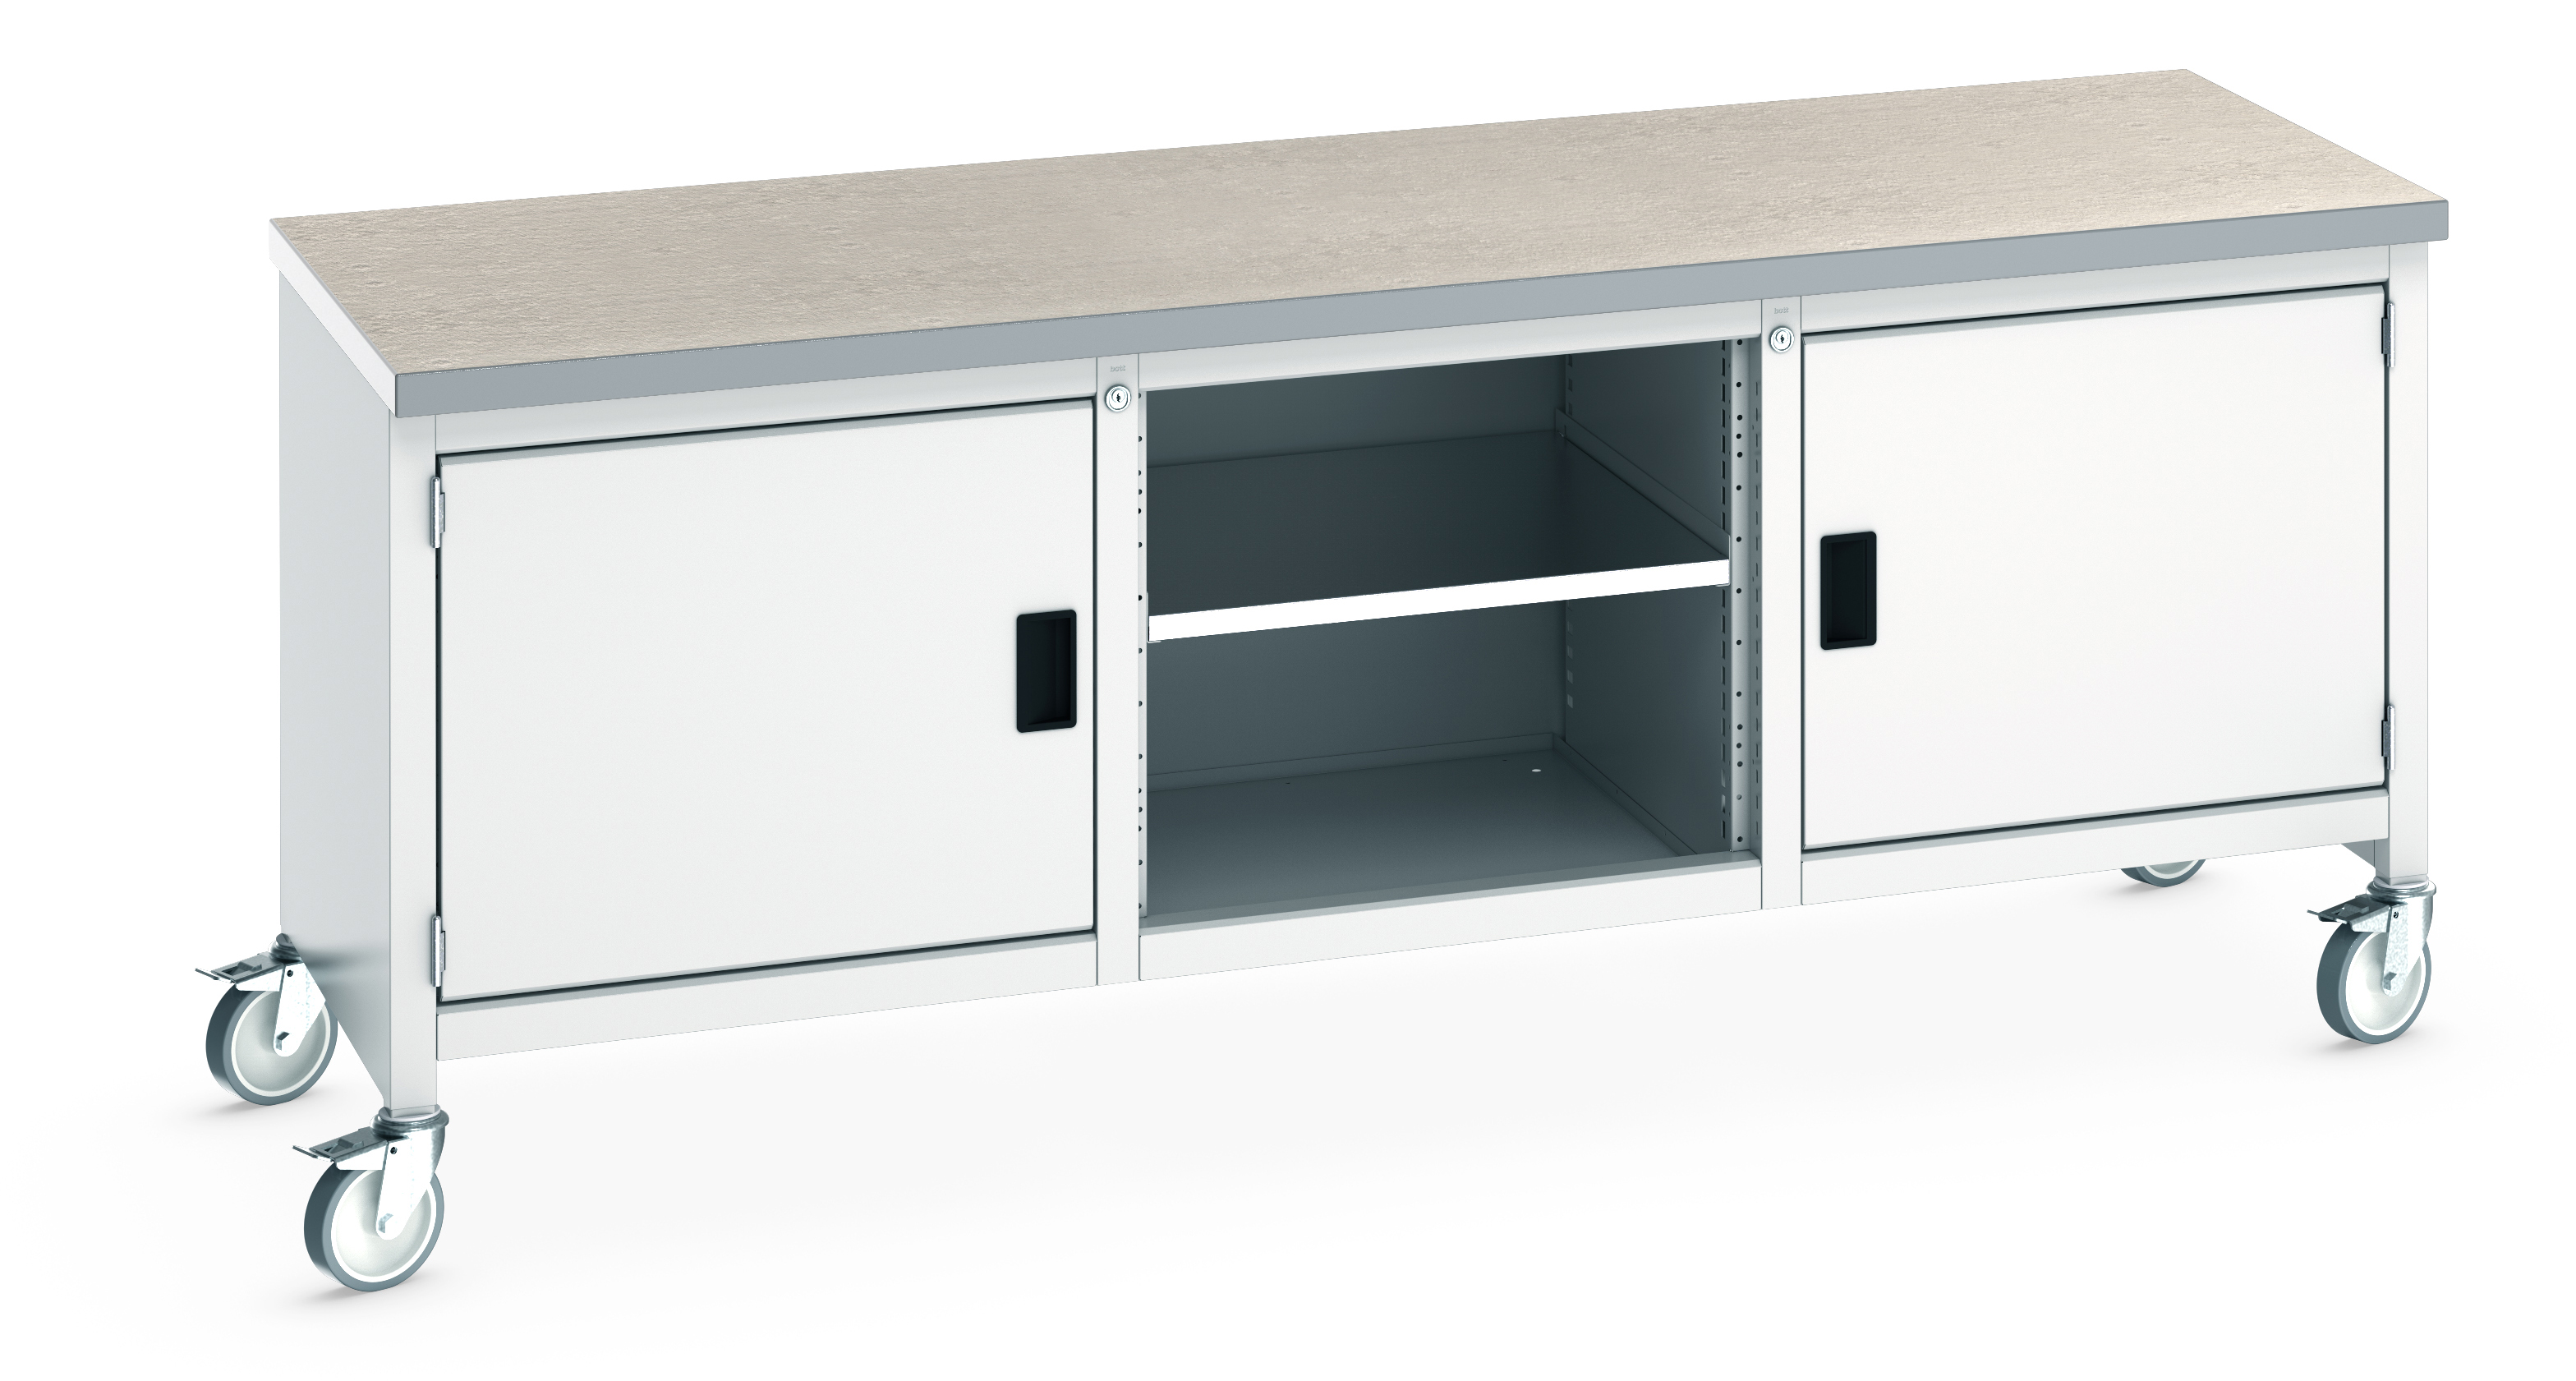 Bott Cubio Mobile Storage Bench With Full Cupboard / Open Cupboard /Full Cupboard - 41002120.16V